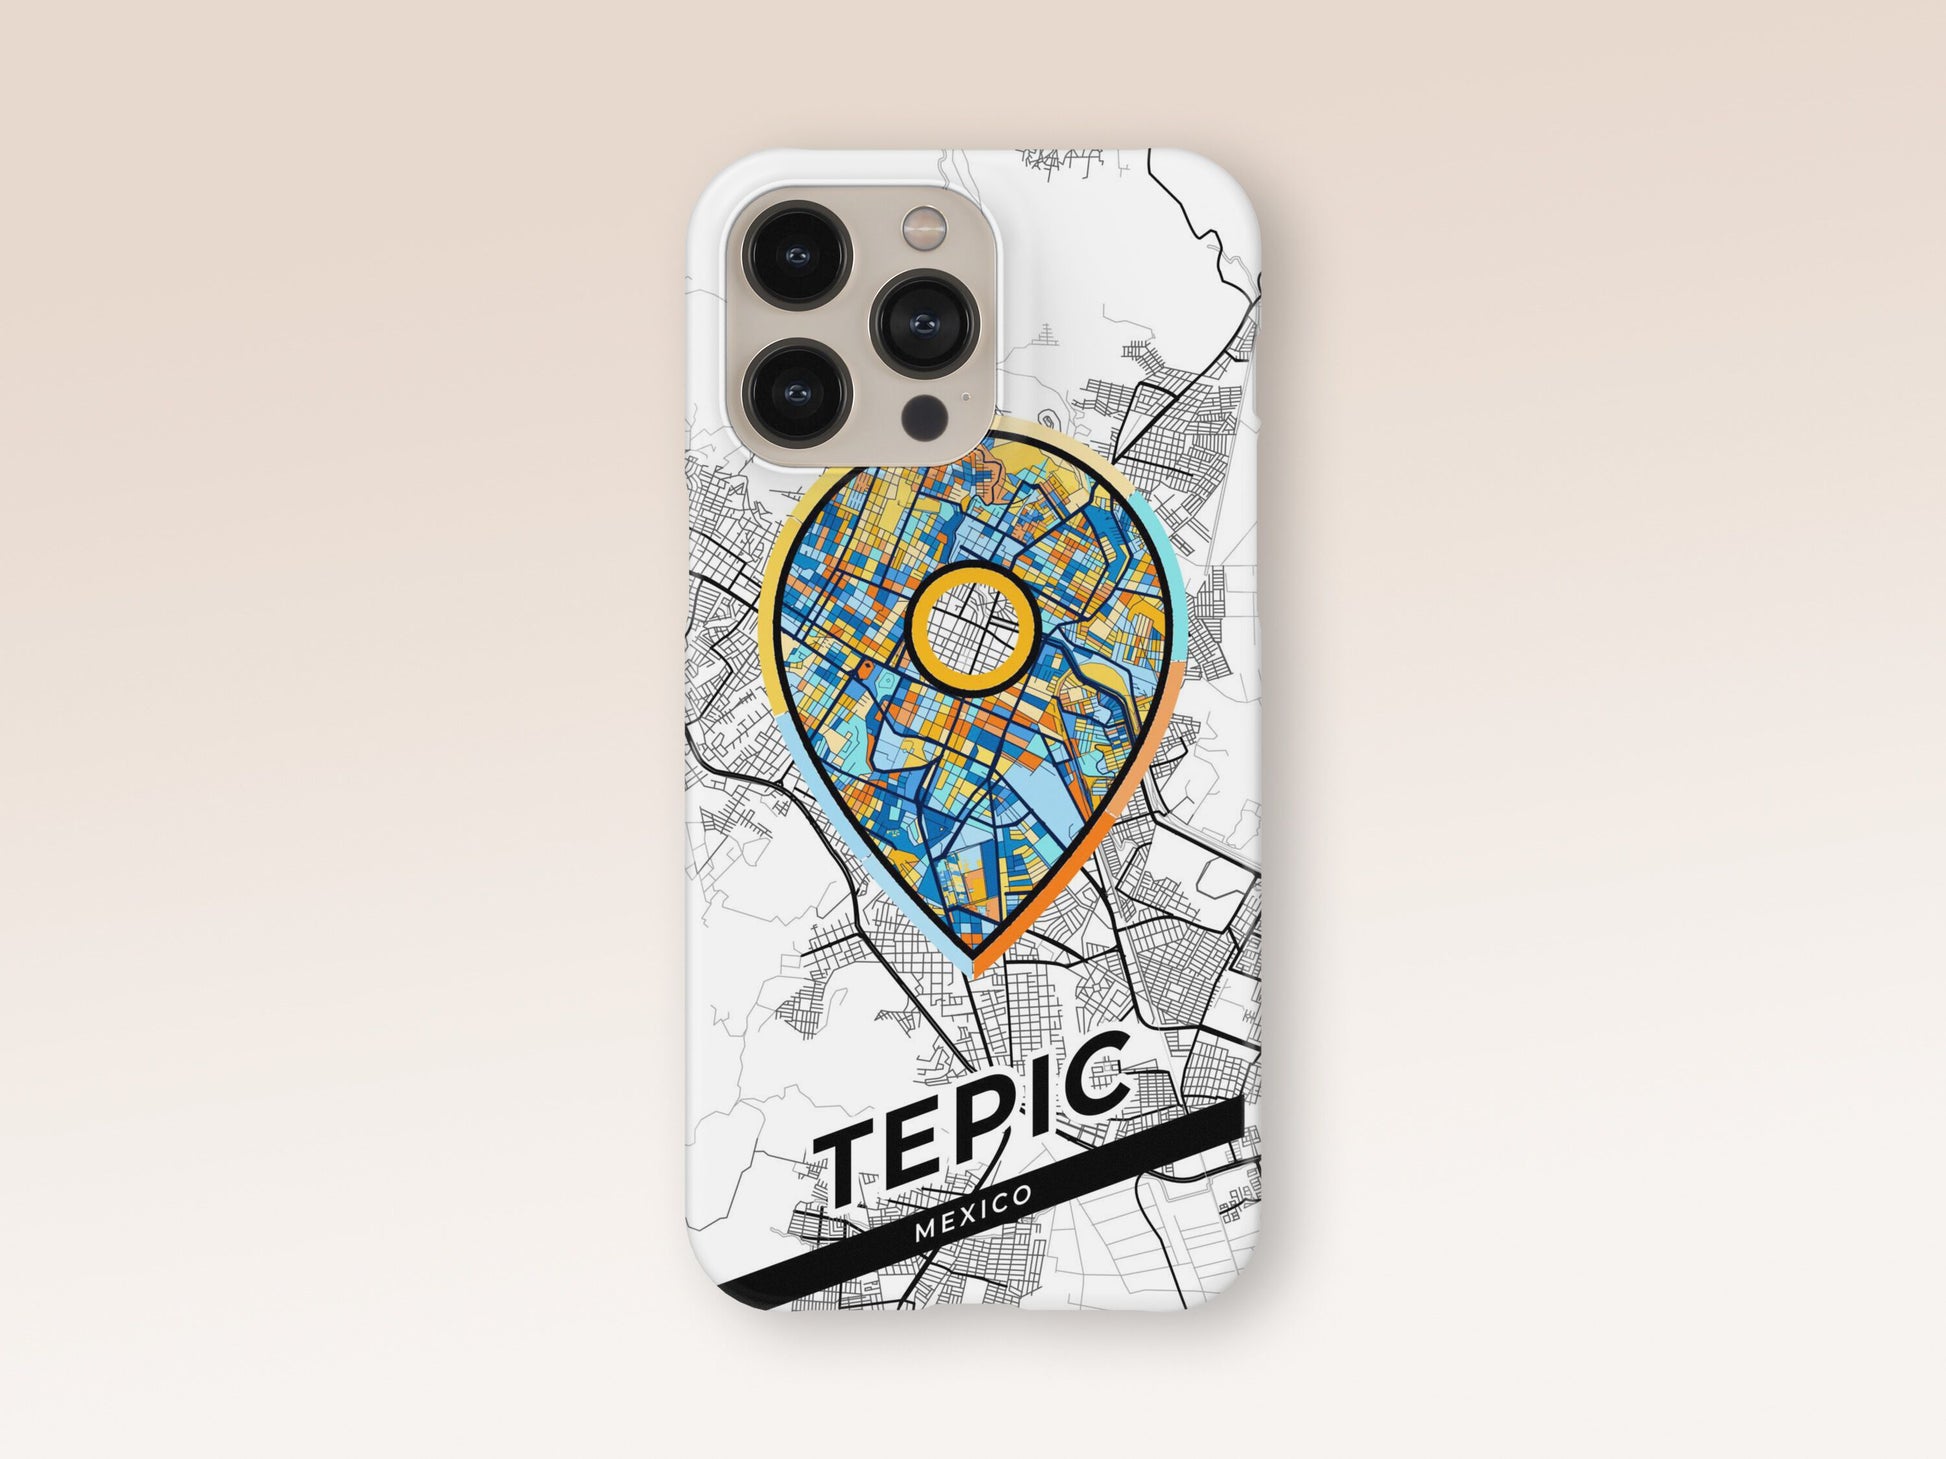 Tepic Mexico slim phone case with colorful icon 1